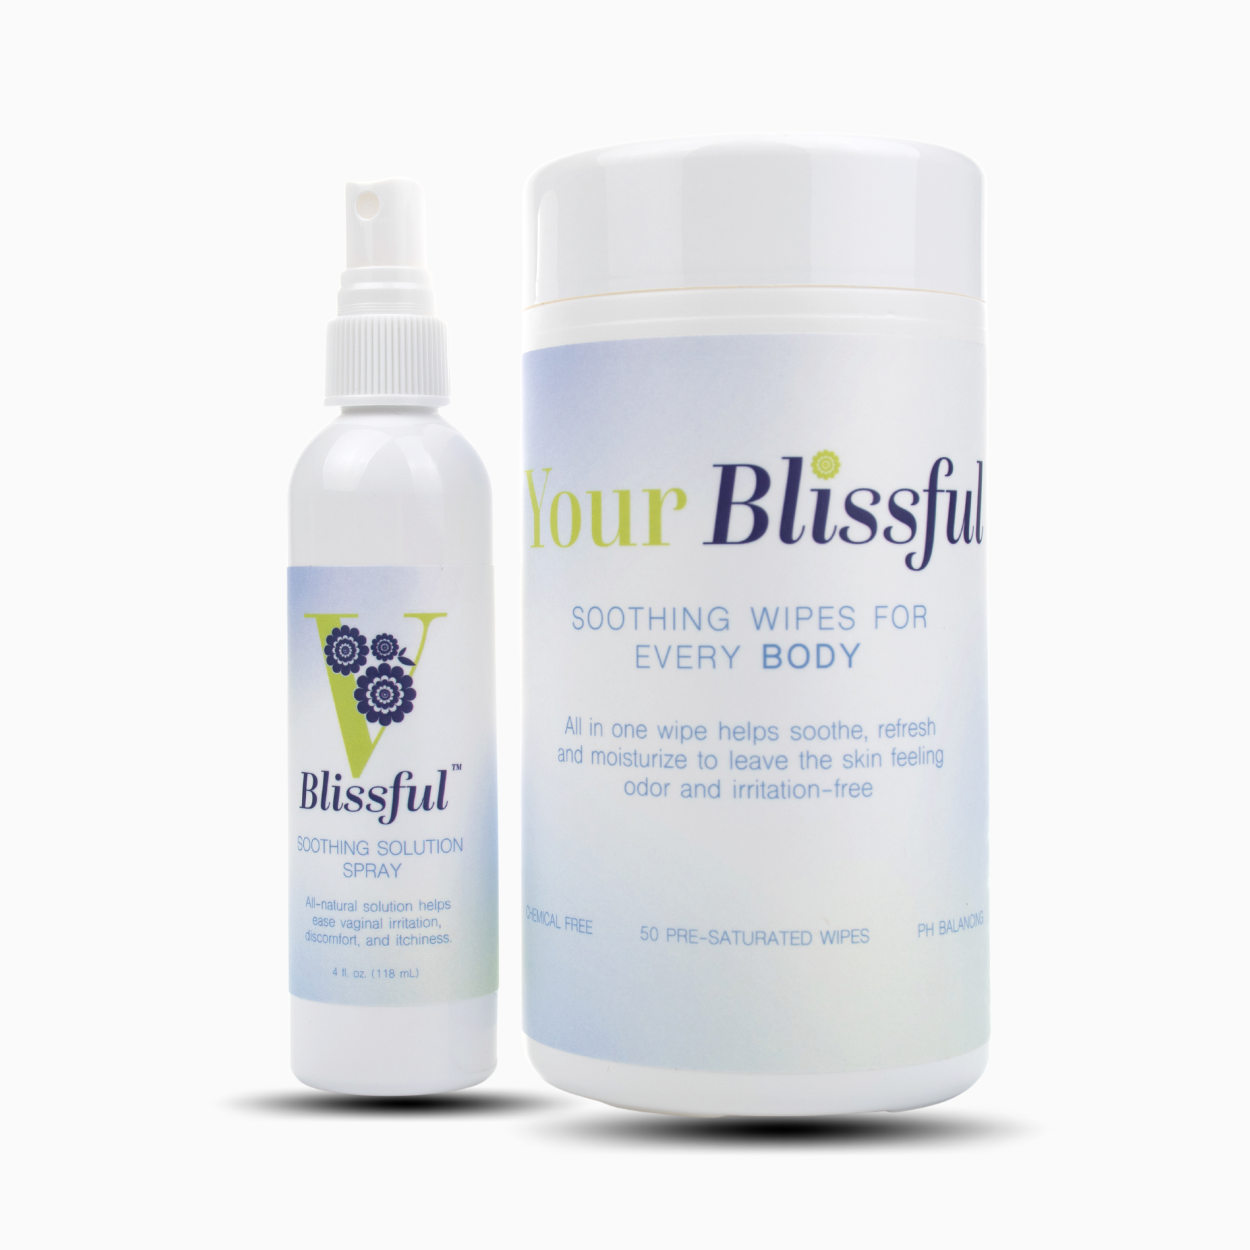 Soothing Solution (Spray) + Wipes for Women Duo